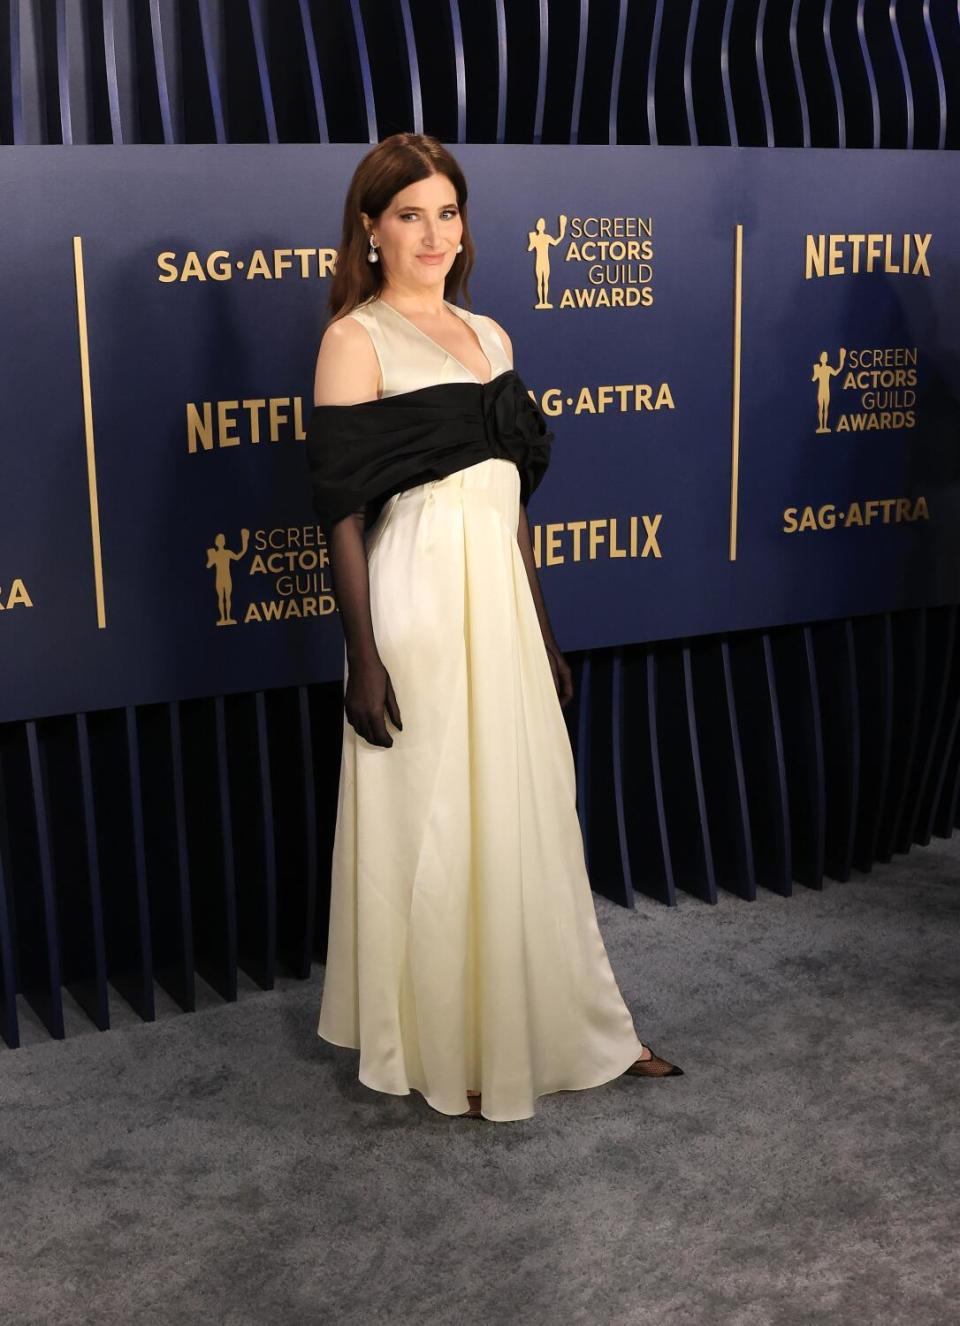 Kathryn Hahn wears a white dress with a black off-shoulder shawl at the SAG Awards.